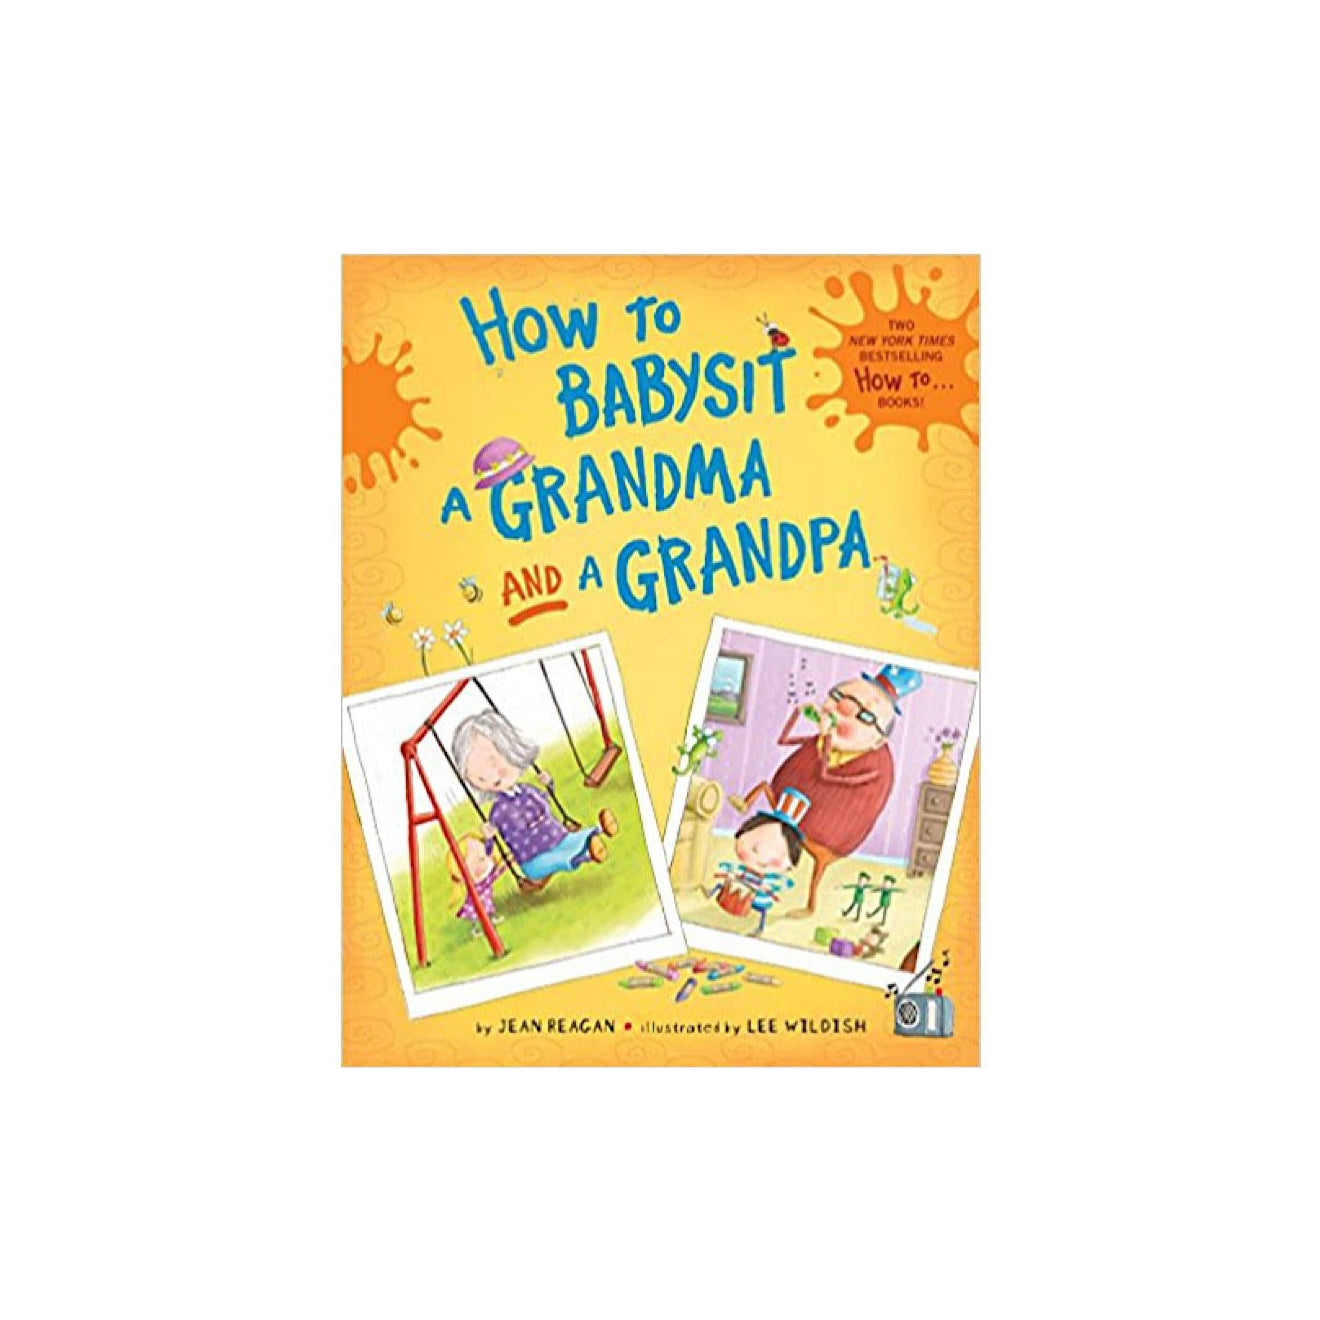 How To Babysit A Grandpa Book